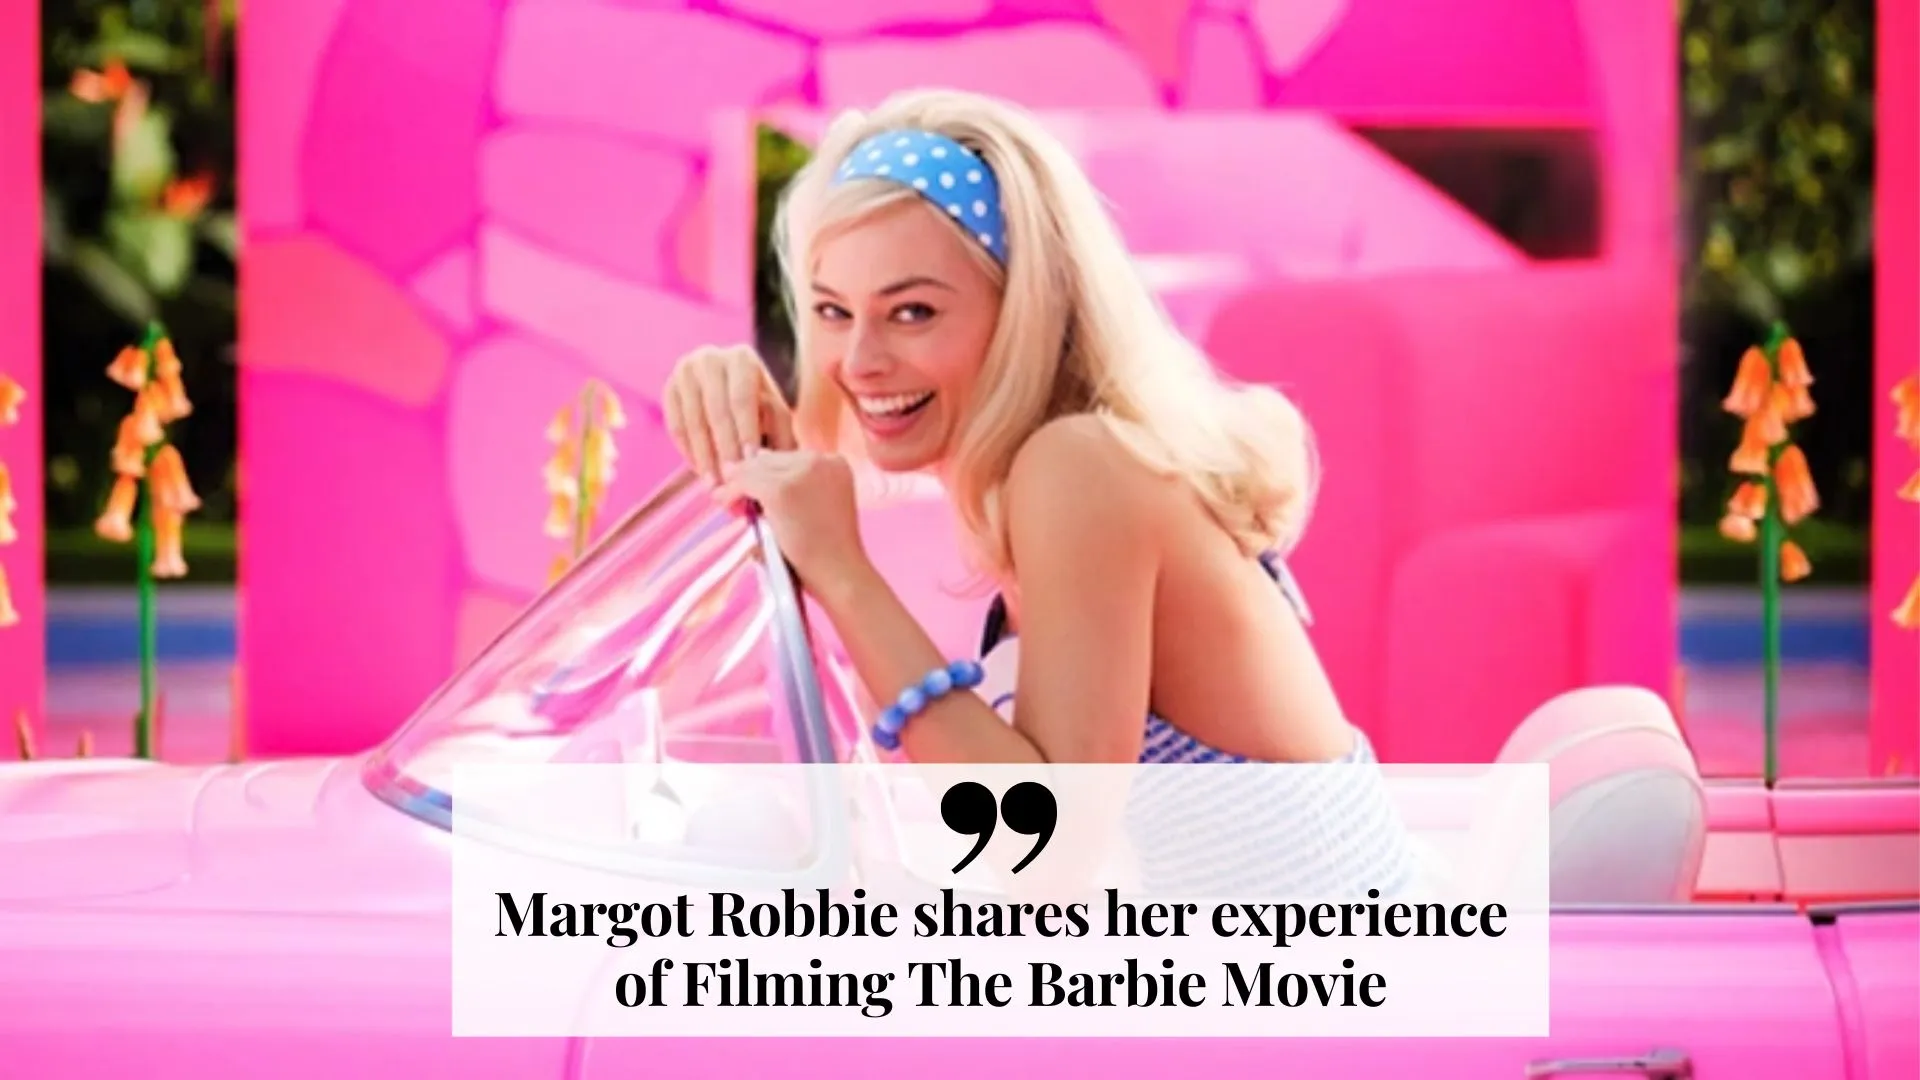 Margot Robbie shares her experience of Filming The Barbie Movie (Image credit: variety)